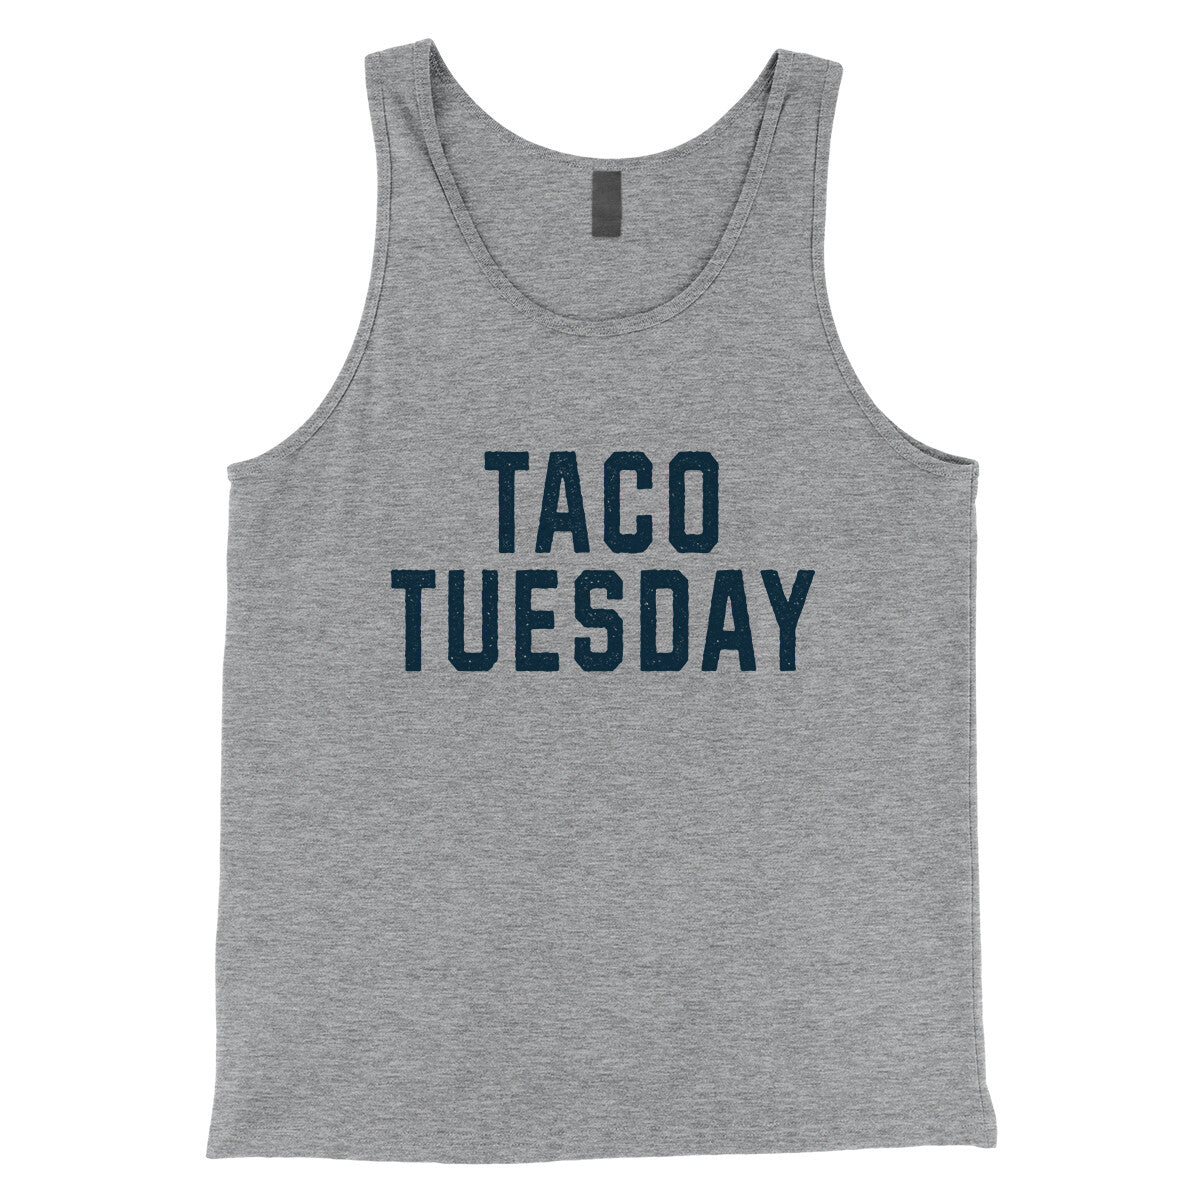 Taco Tuesday in Athletic Heather Color